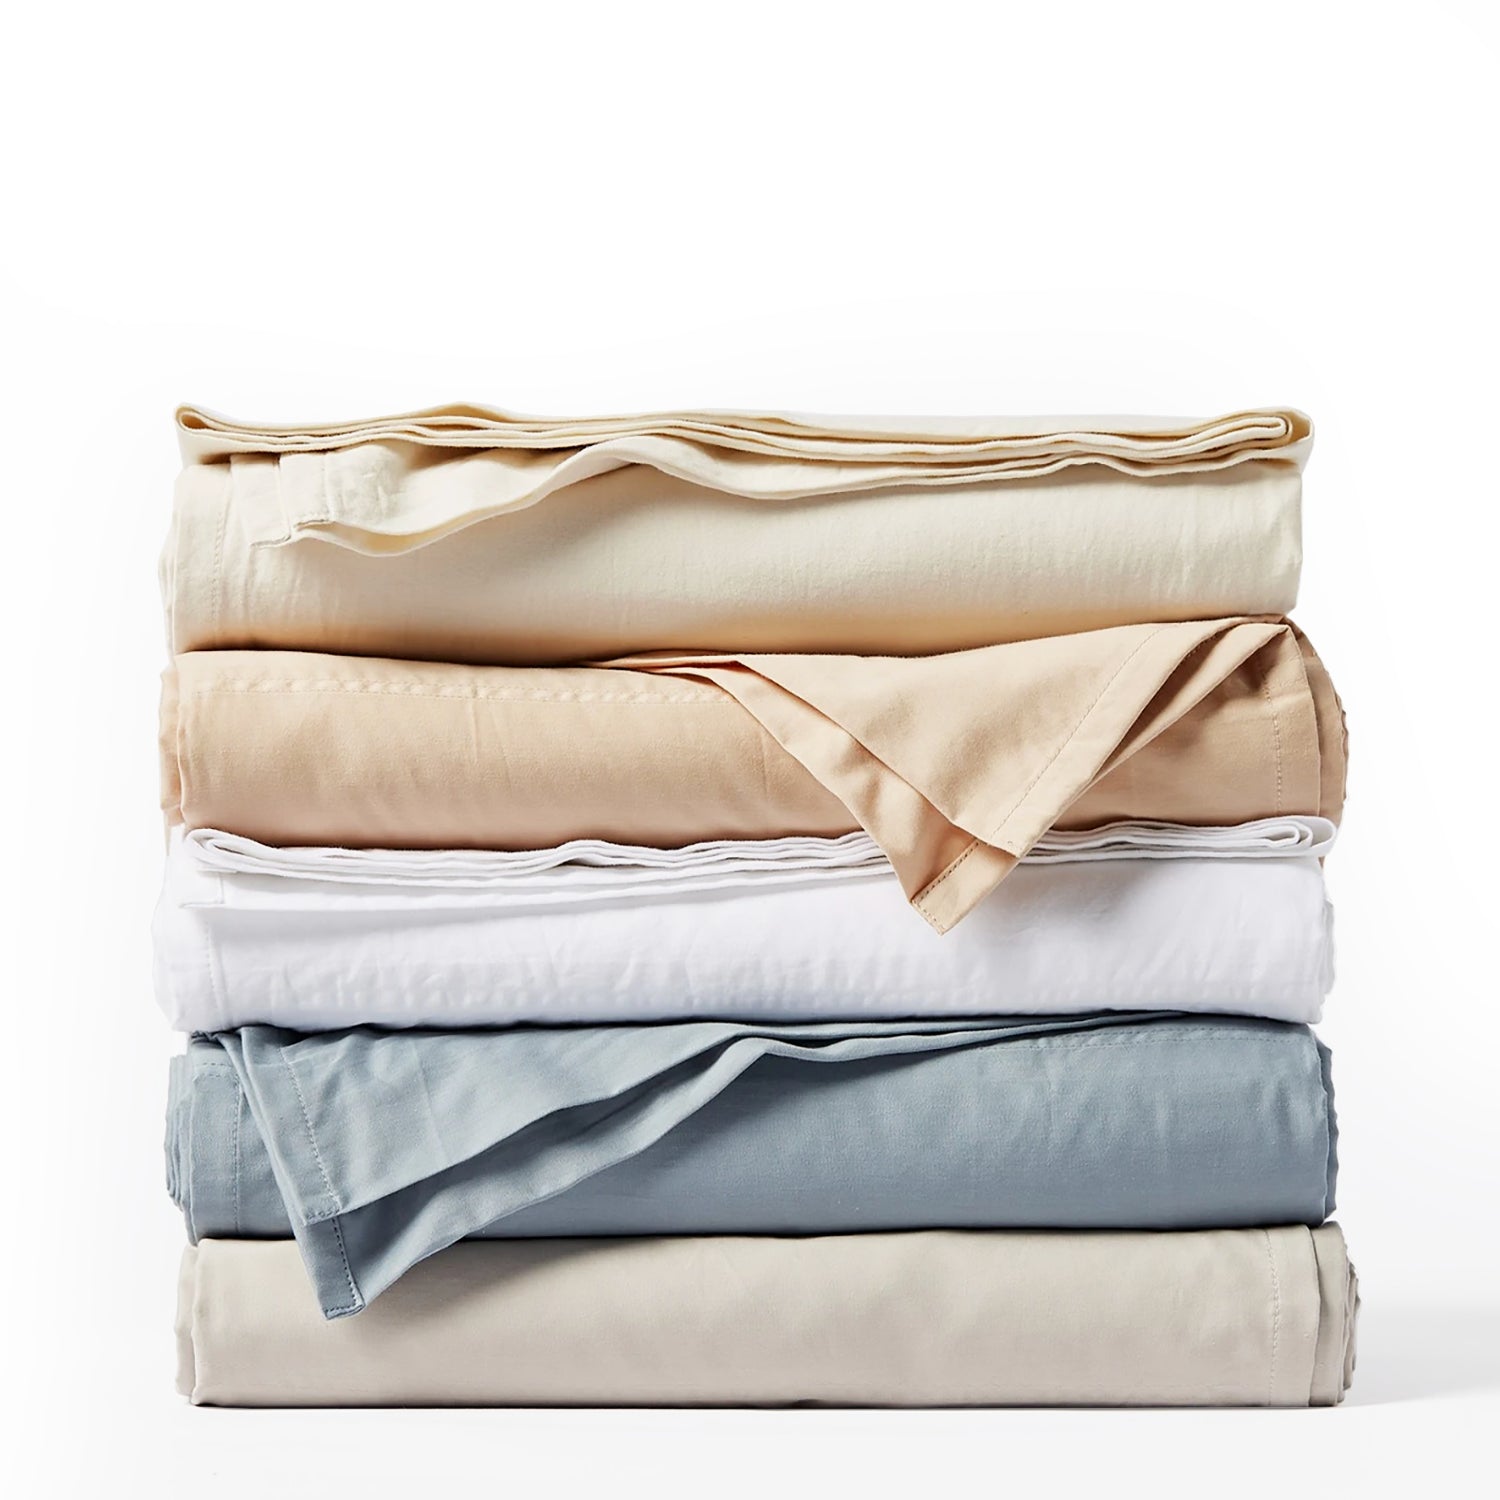 Relaxed Sateen Sheets - This washed, weighty sheeting embraces you in the raw beauty and performance of natural, lived-in softness. After many trials, we perfected our cloud-like sateen. A slightly heavier weave lends soothing, breathable comfort without the sheen of most sateens.